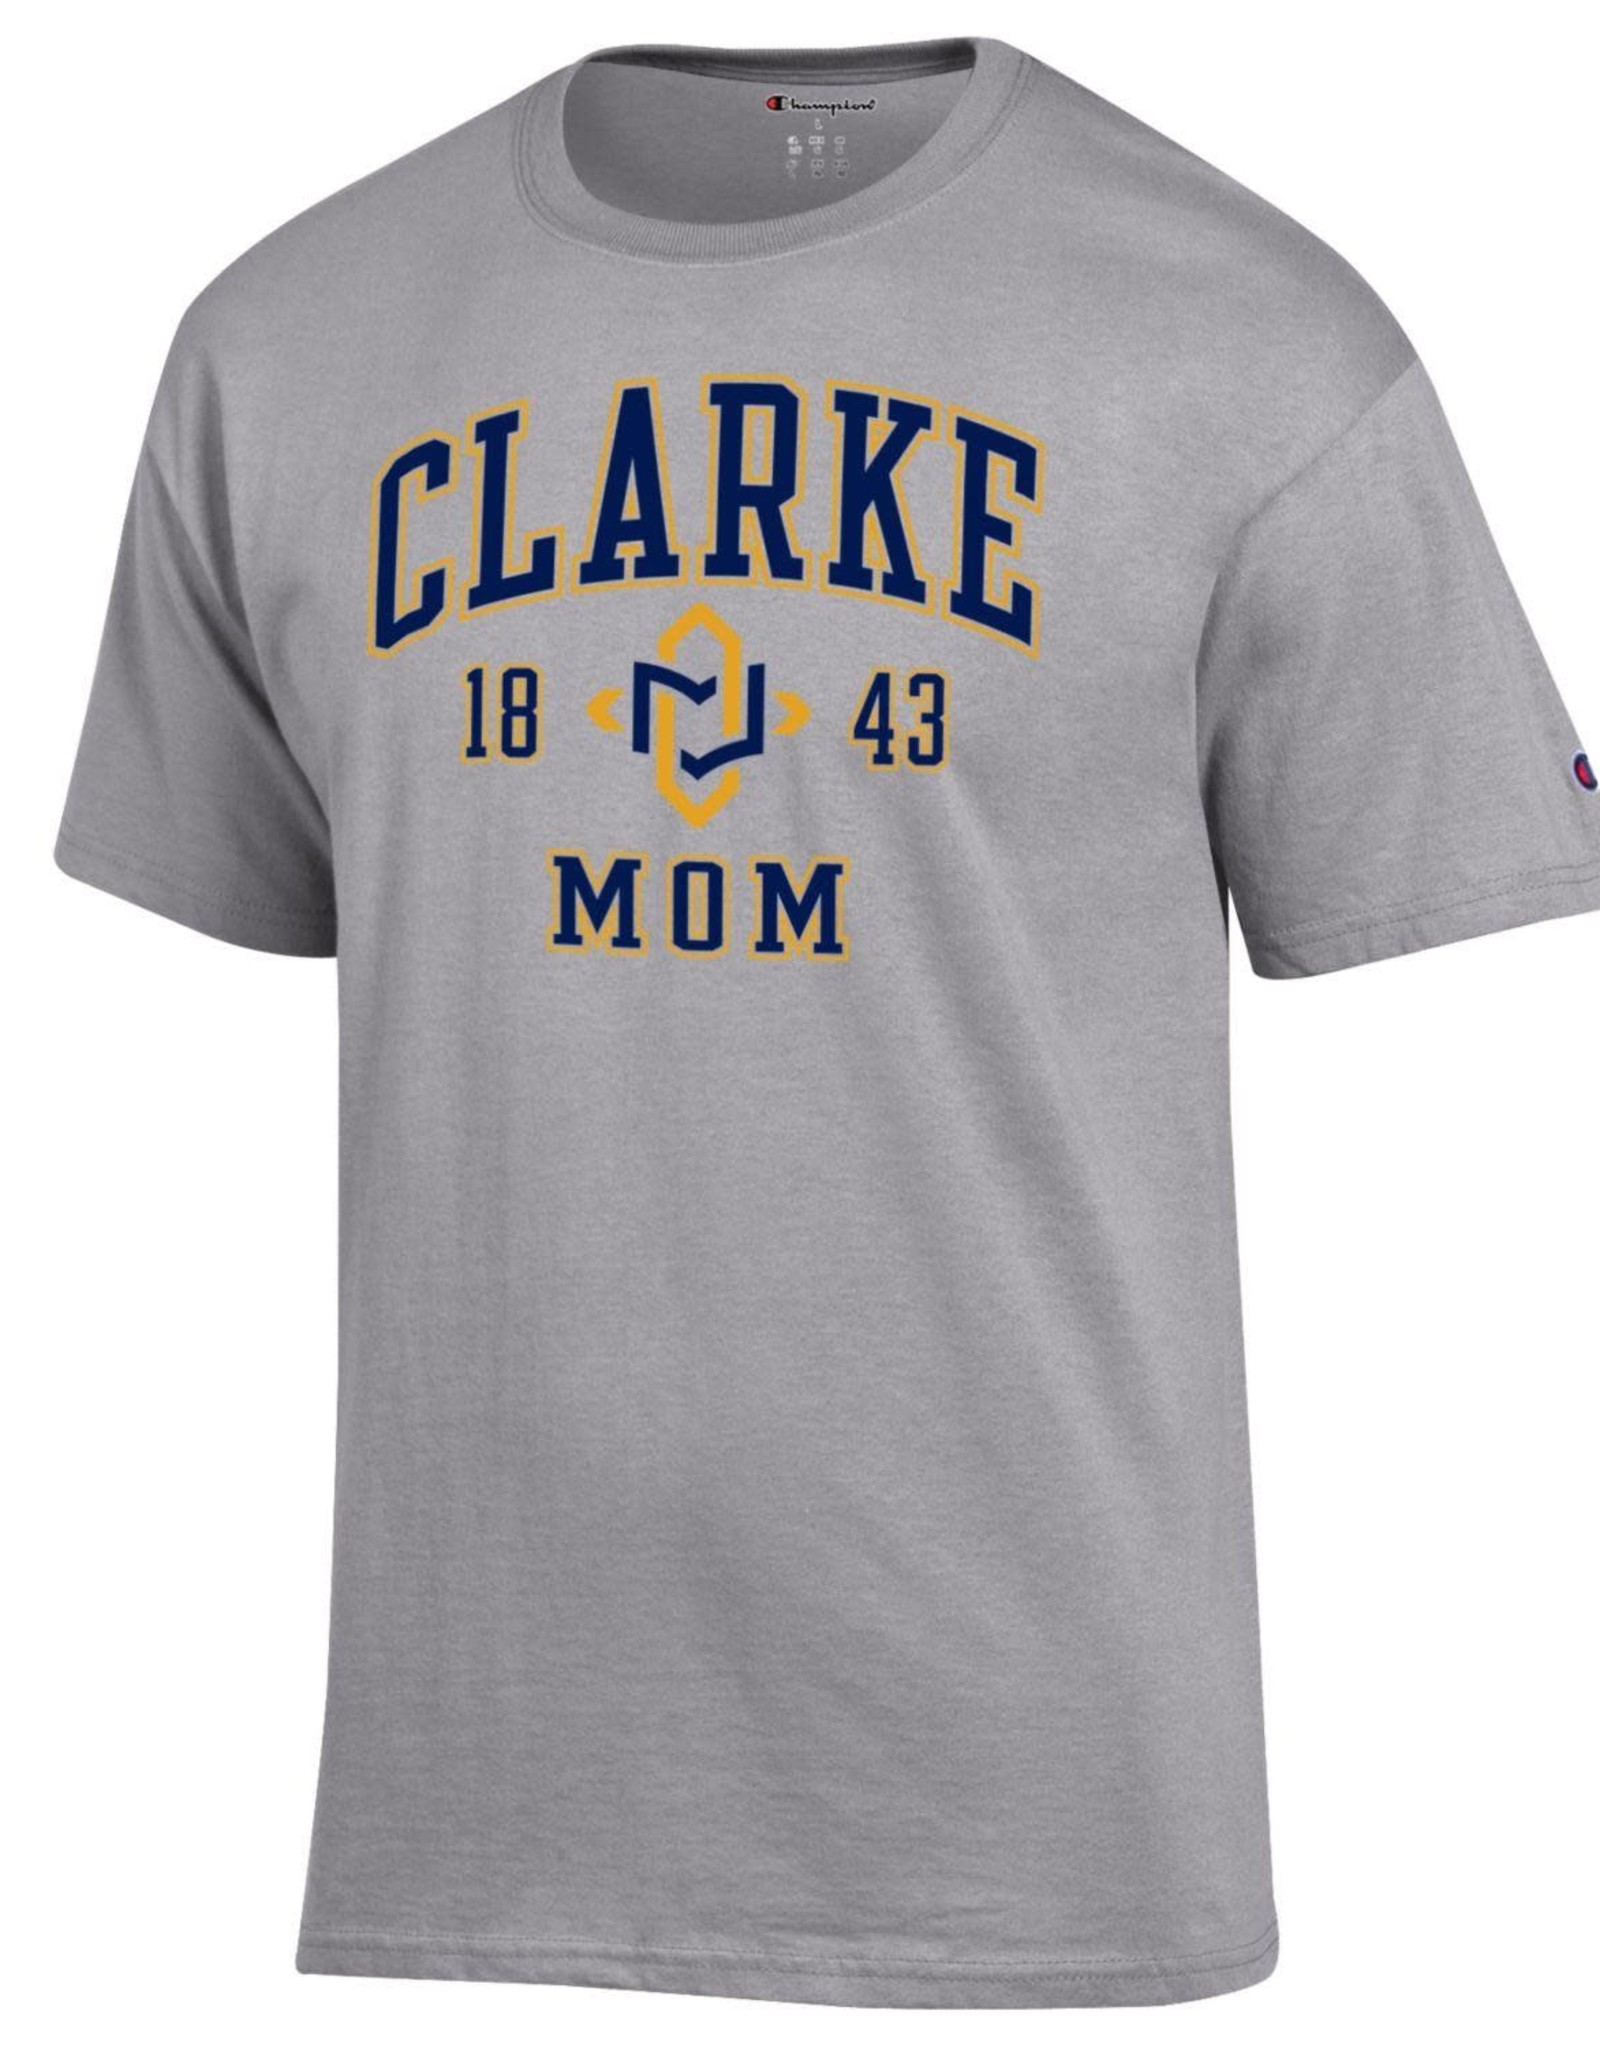 Alumni And Family T-Shirt in Grey